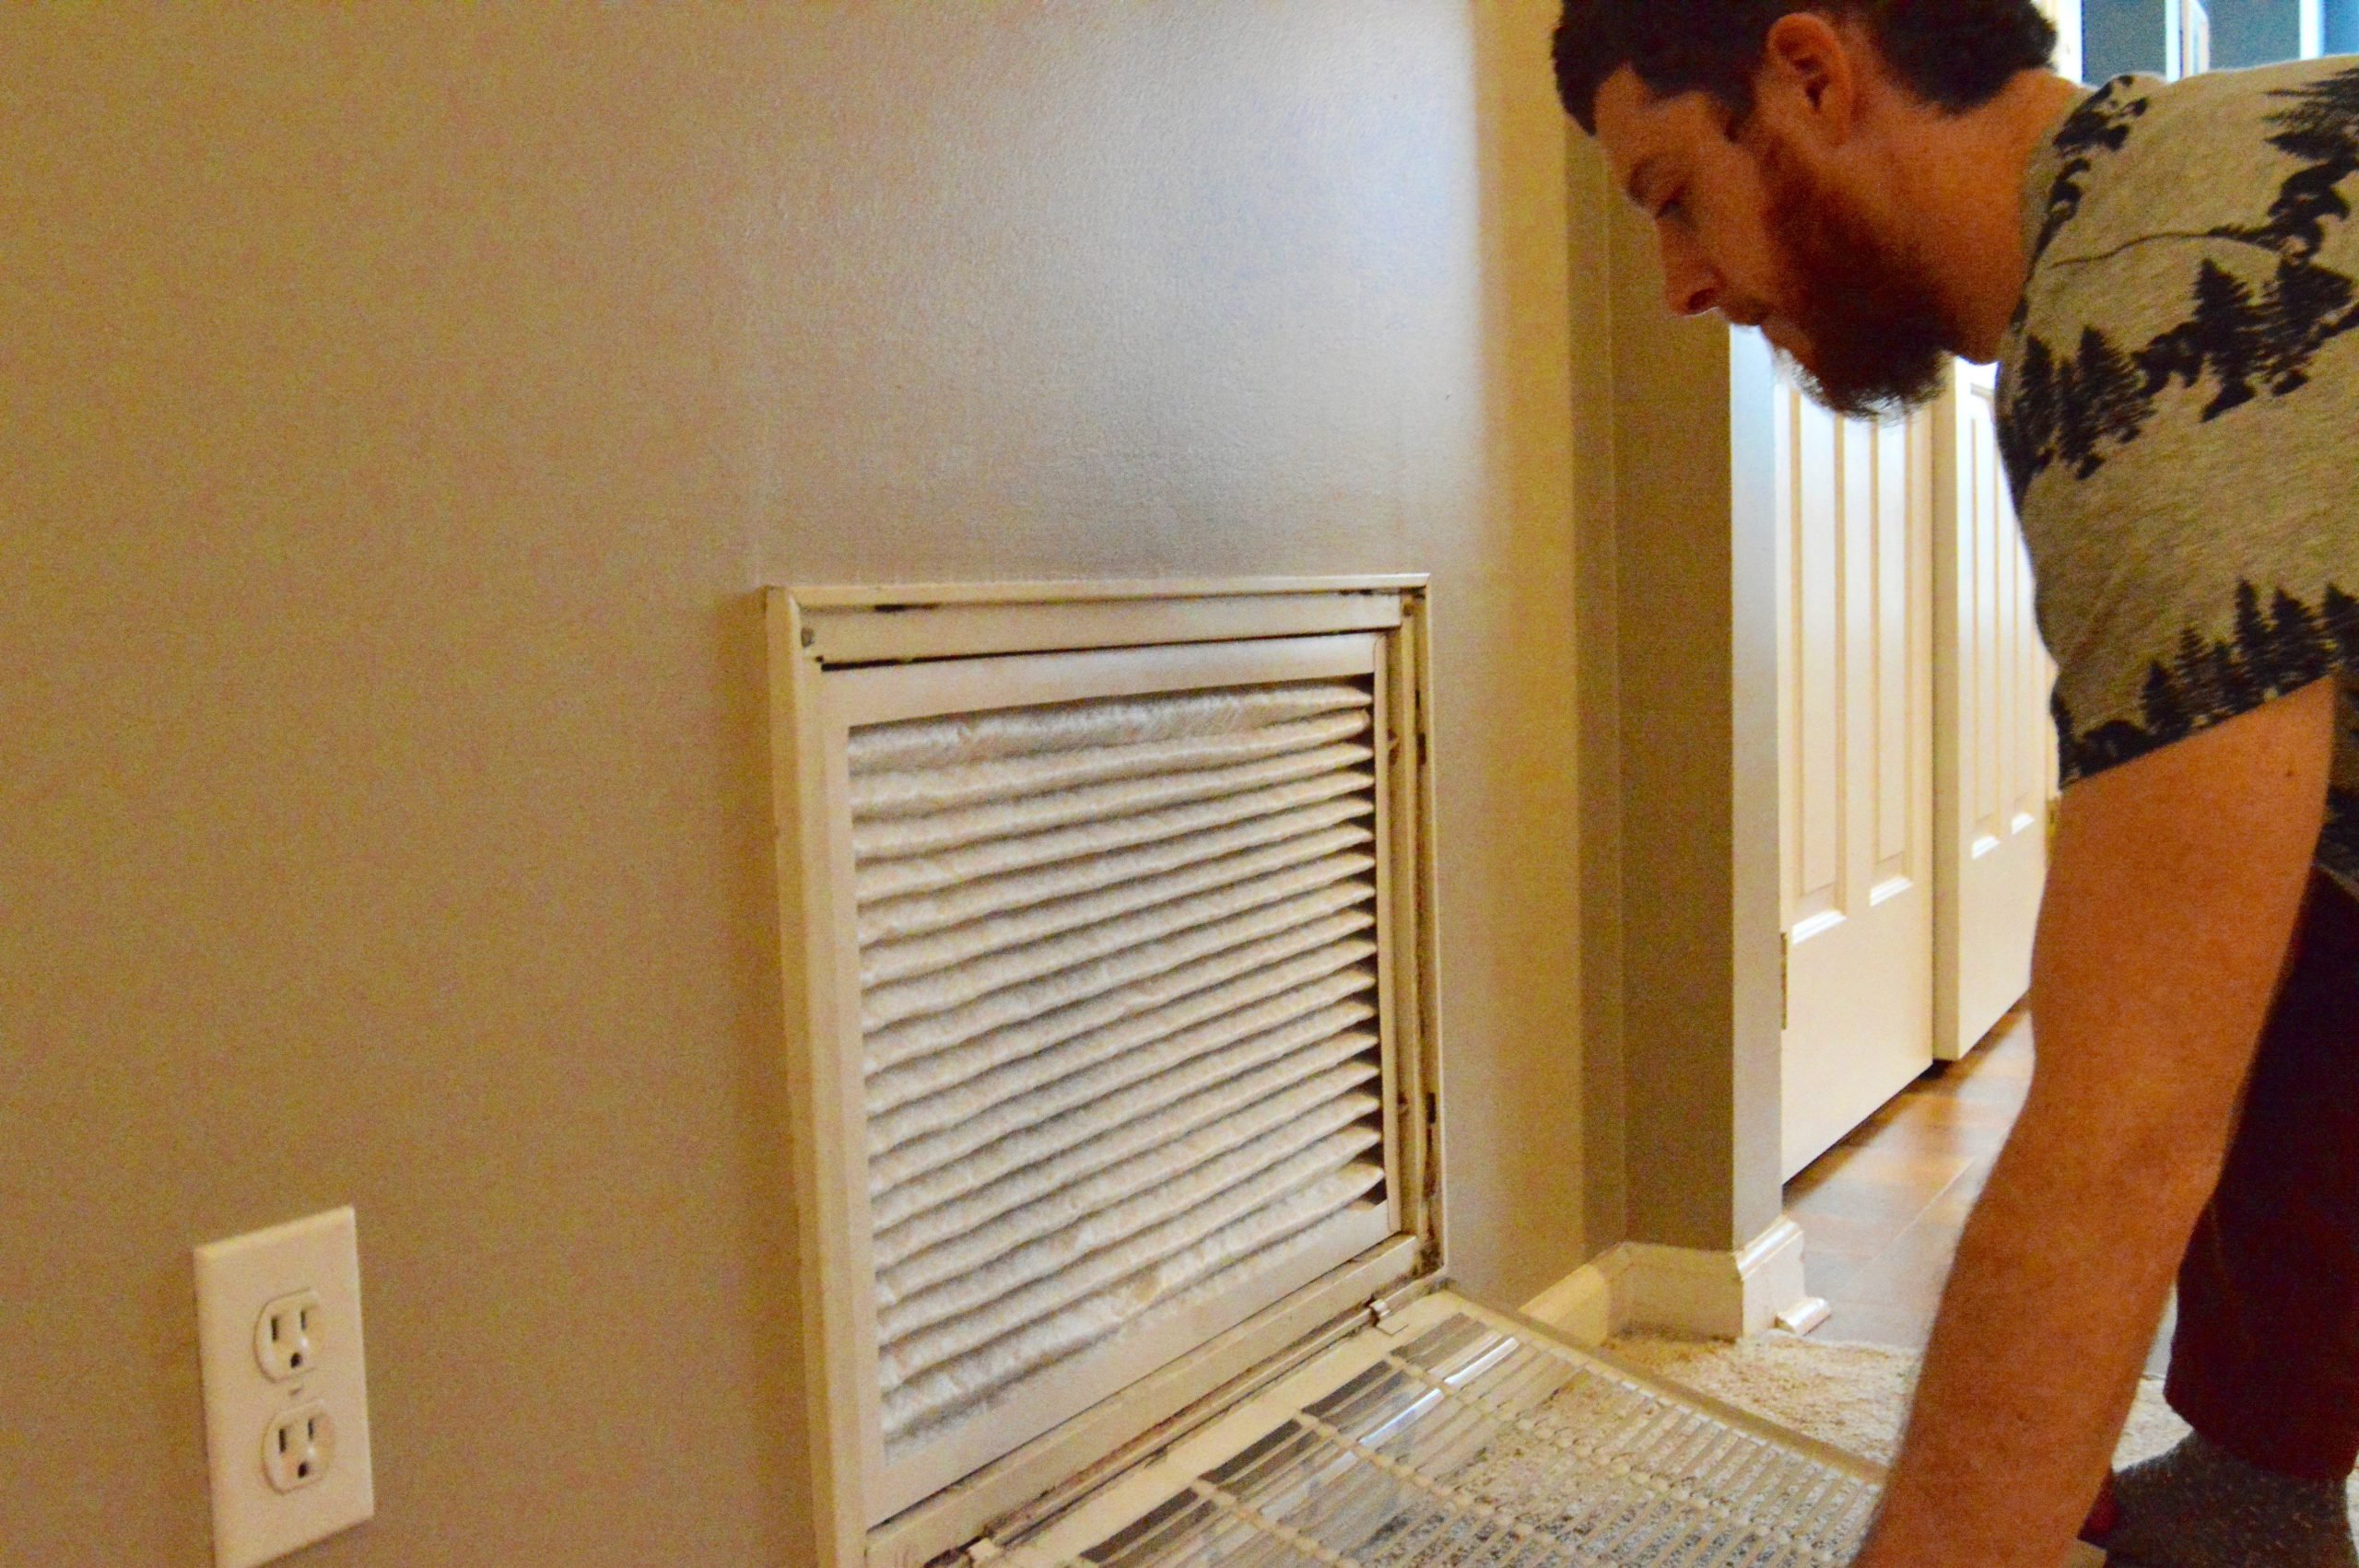 changing pleated air filter